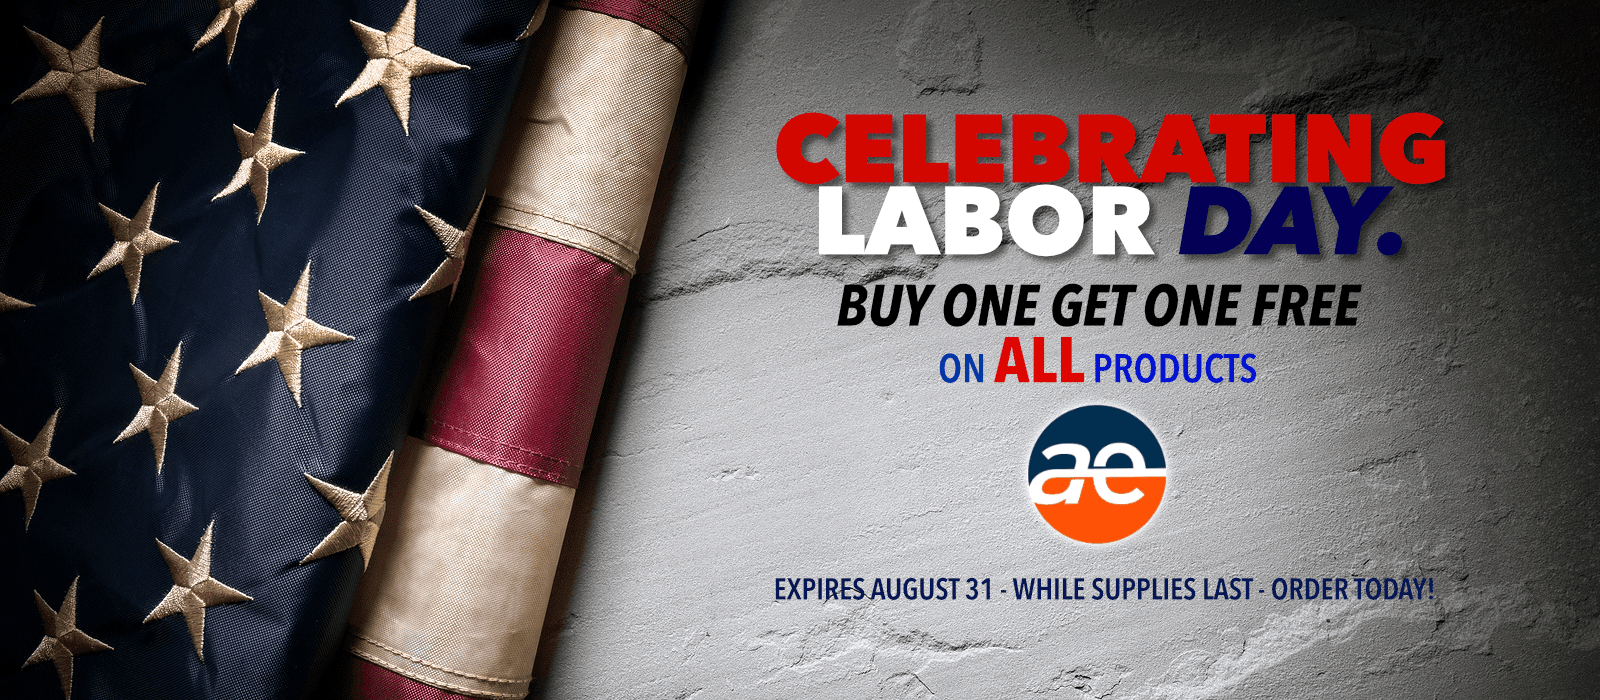 Celebrating Labor Day - Buy One Get One Free!